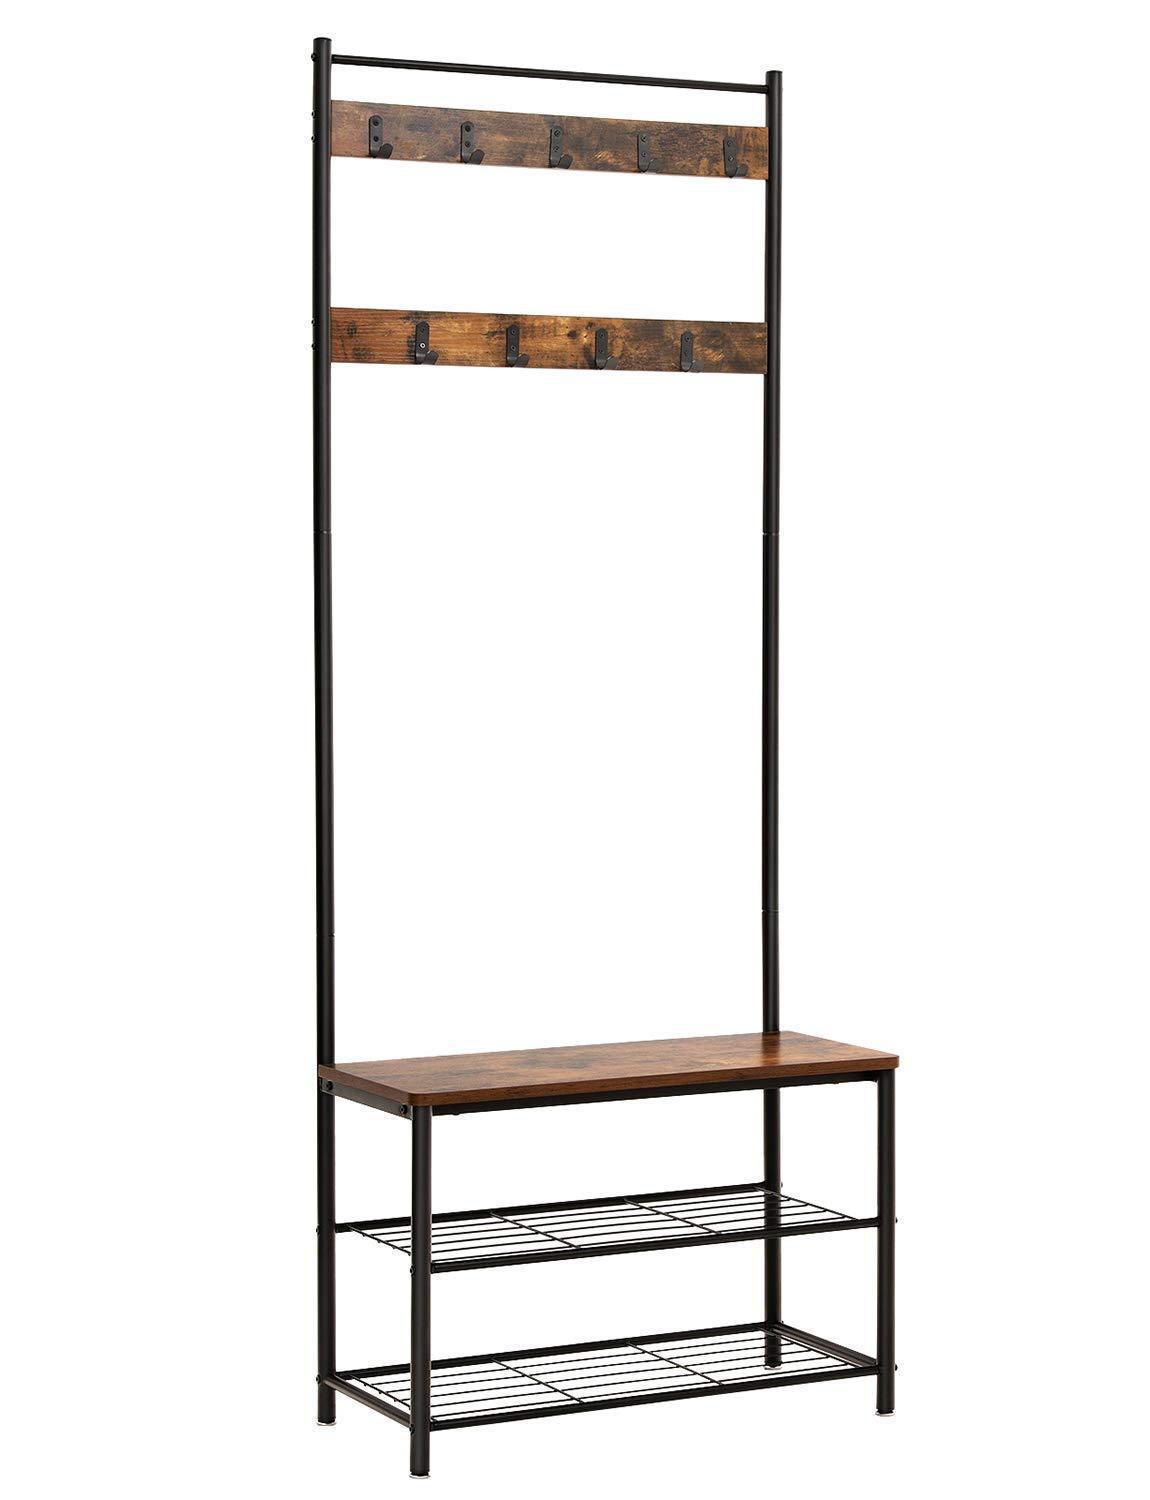 Industrial Coat Rack, Hall Tree Entryway Shoe Bench, Storage Shelf Organizer, Accent Furniture with Metal Frame UHSR41BX, Rustic Brown